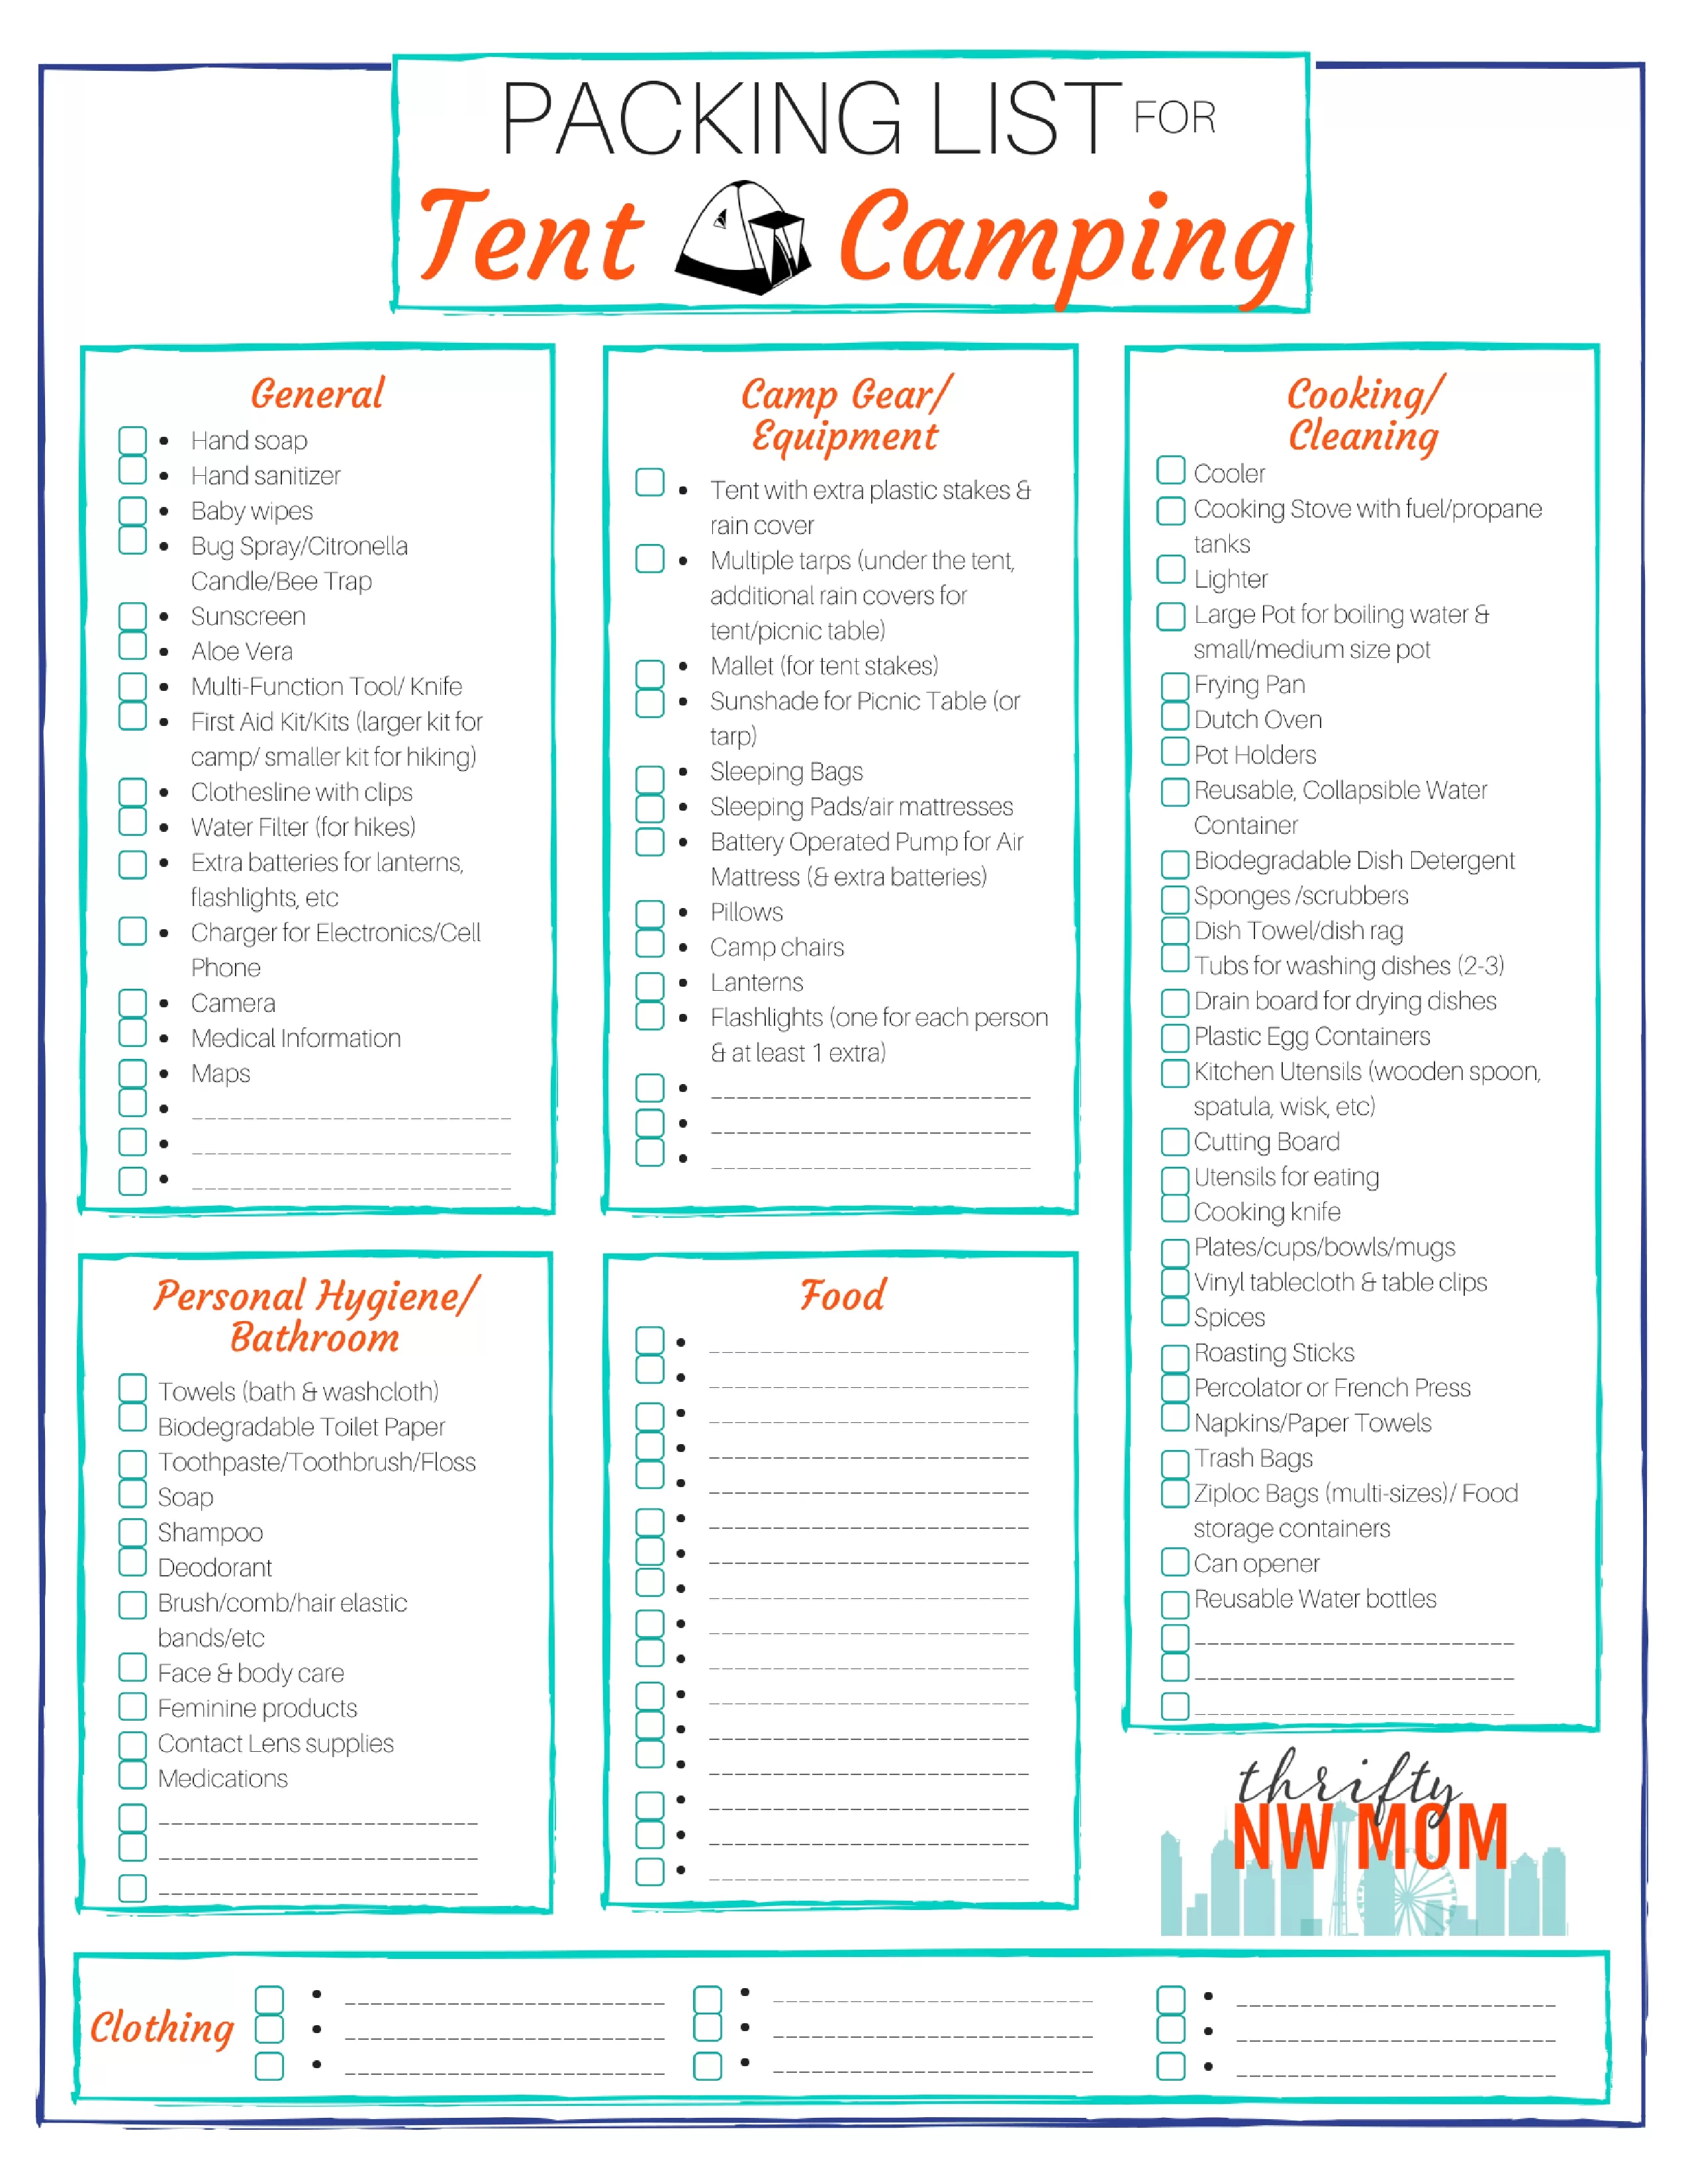 20+ Printable Camping Activities and Checklists  #campingtents,campsites,rvcamping,campinggear,campingsupp…